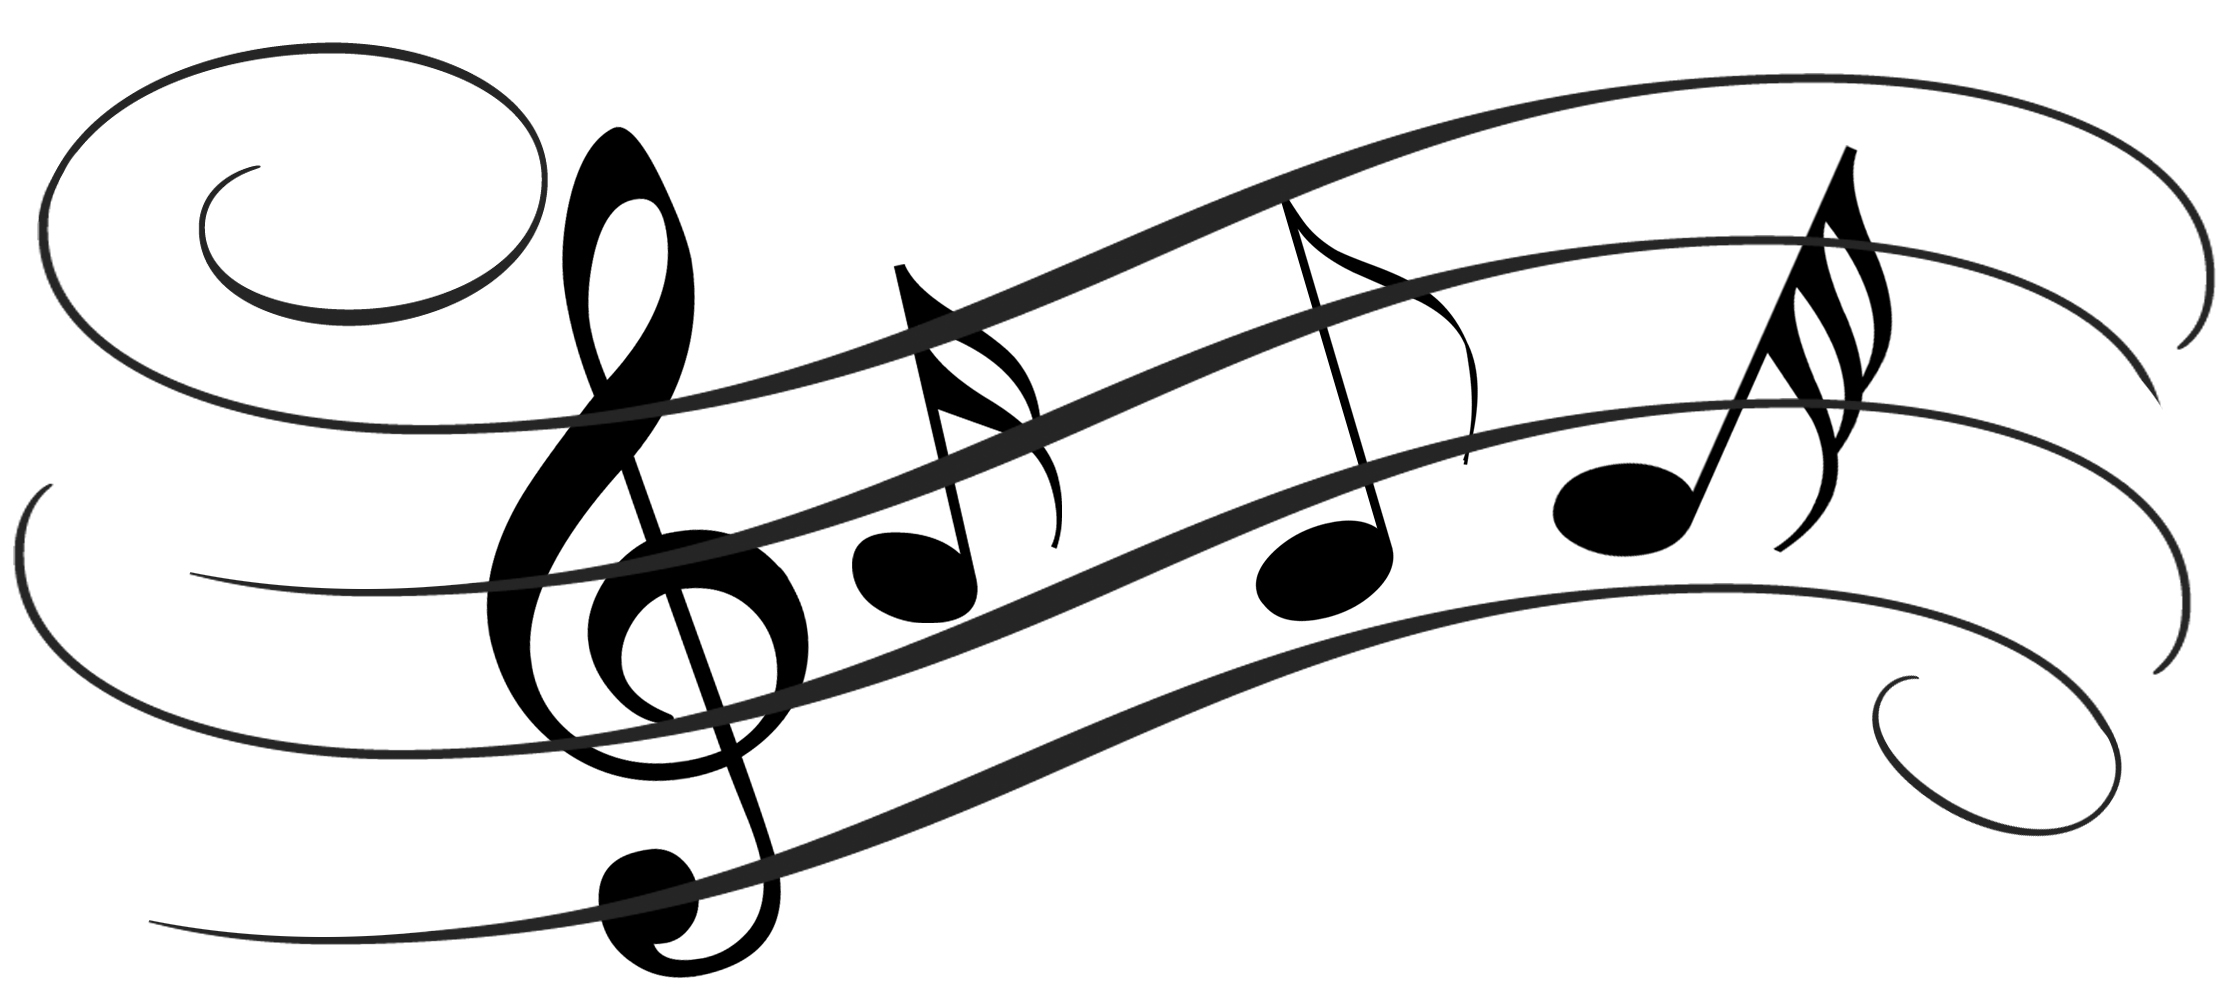 Music Staff Clip Art - Free Clipart Images